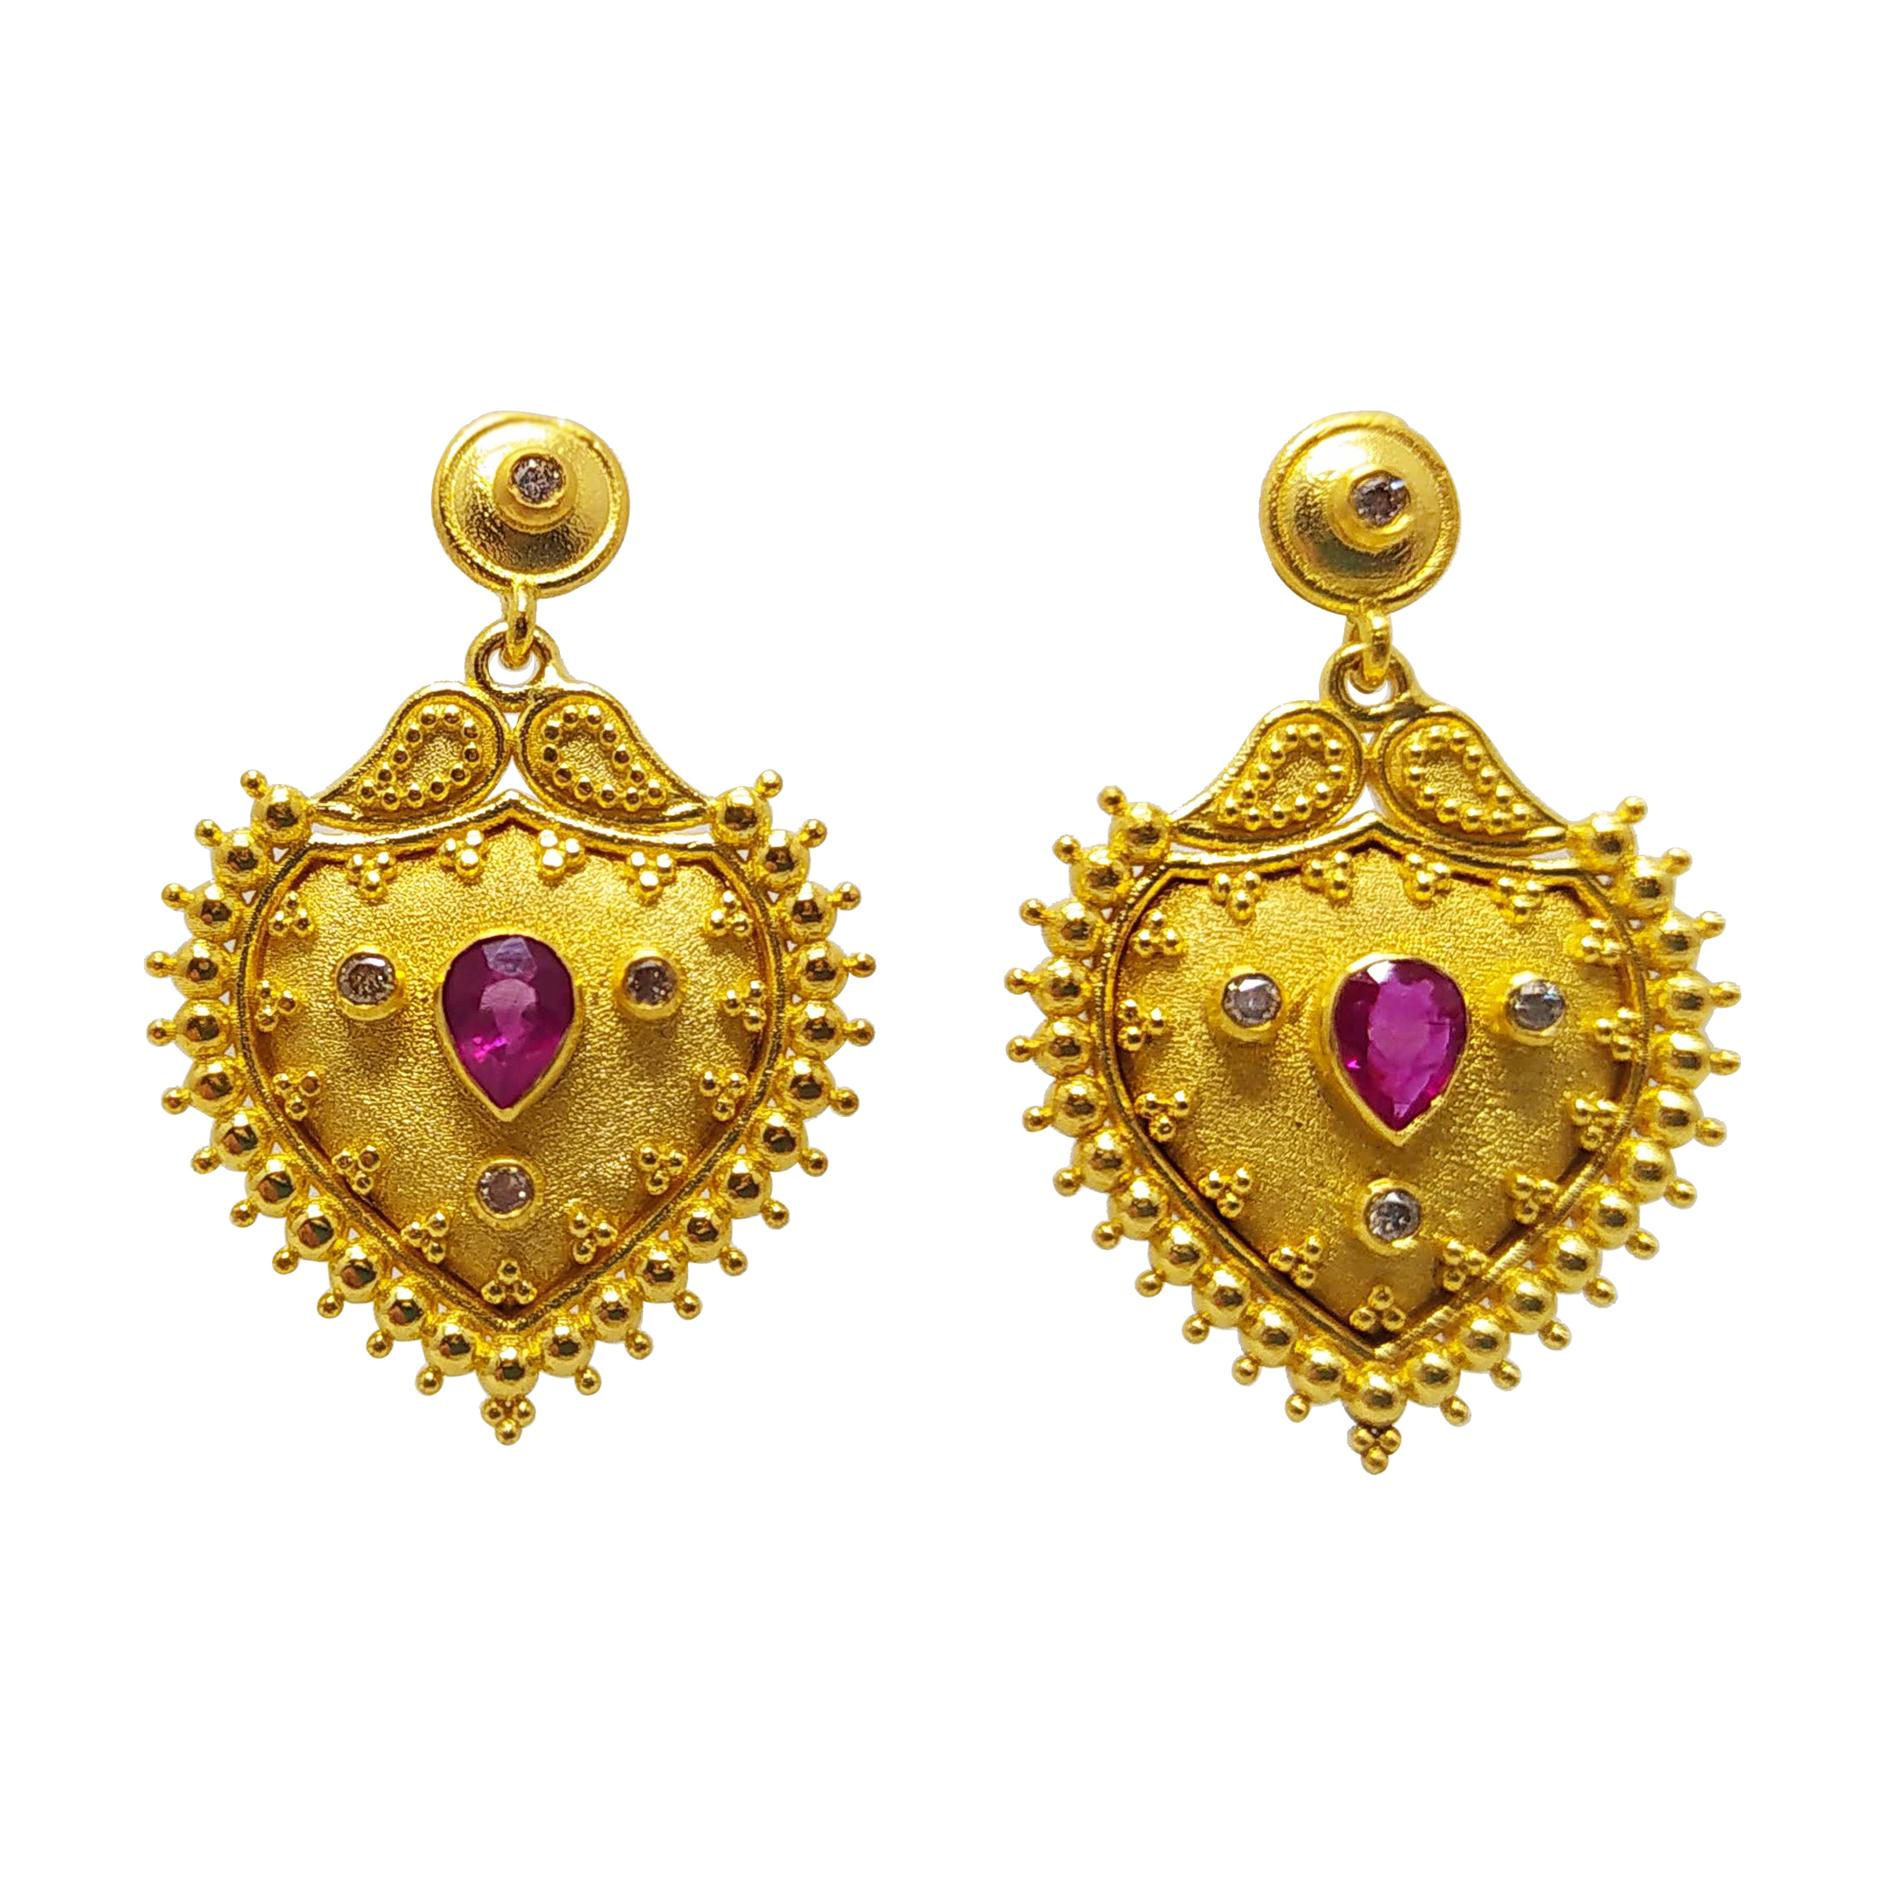 Georgios Collections 18 Karat Yellow Gold Diamond and Ruby Stud Drop Earrings